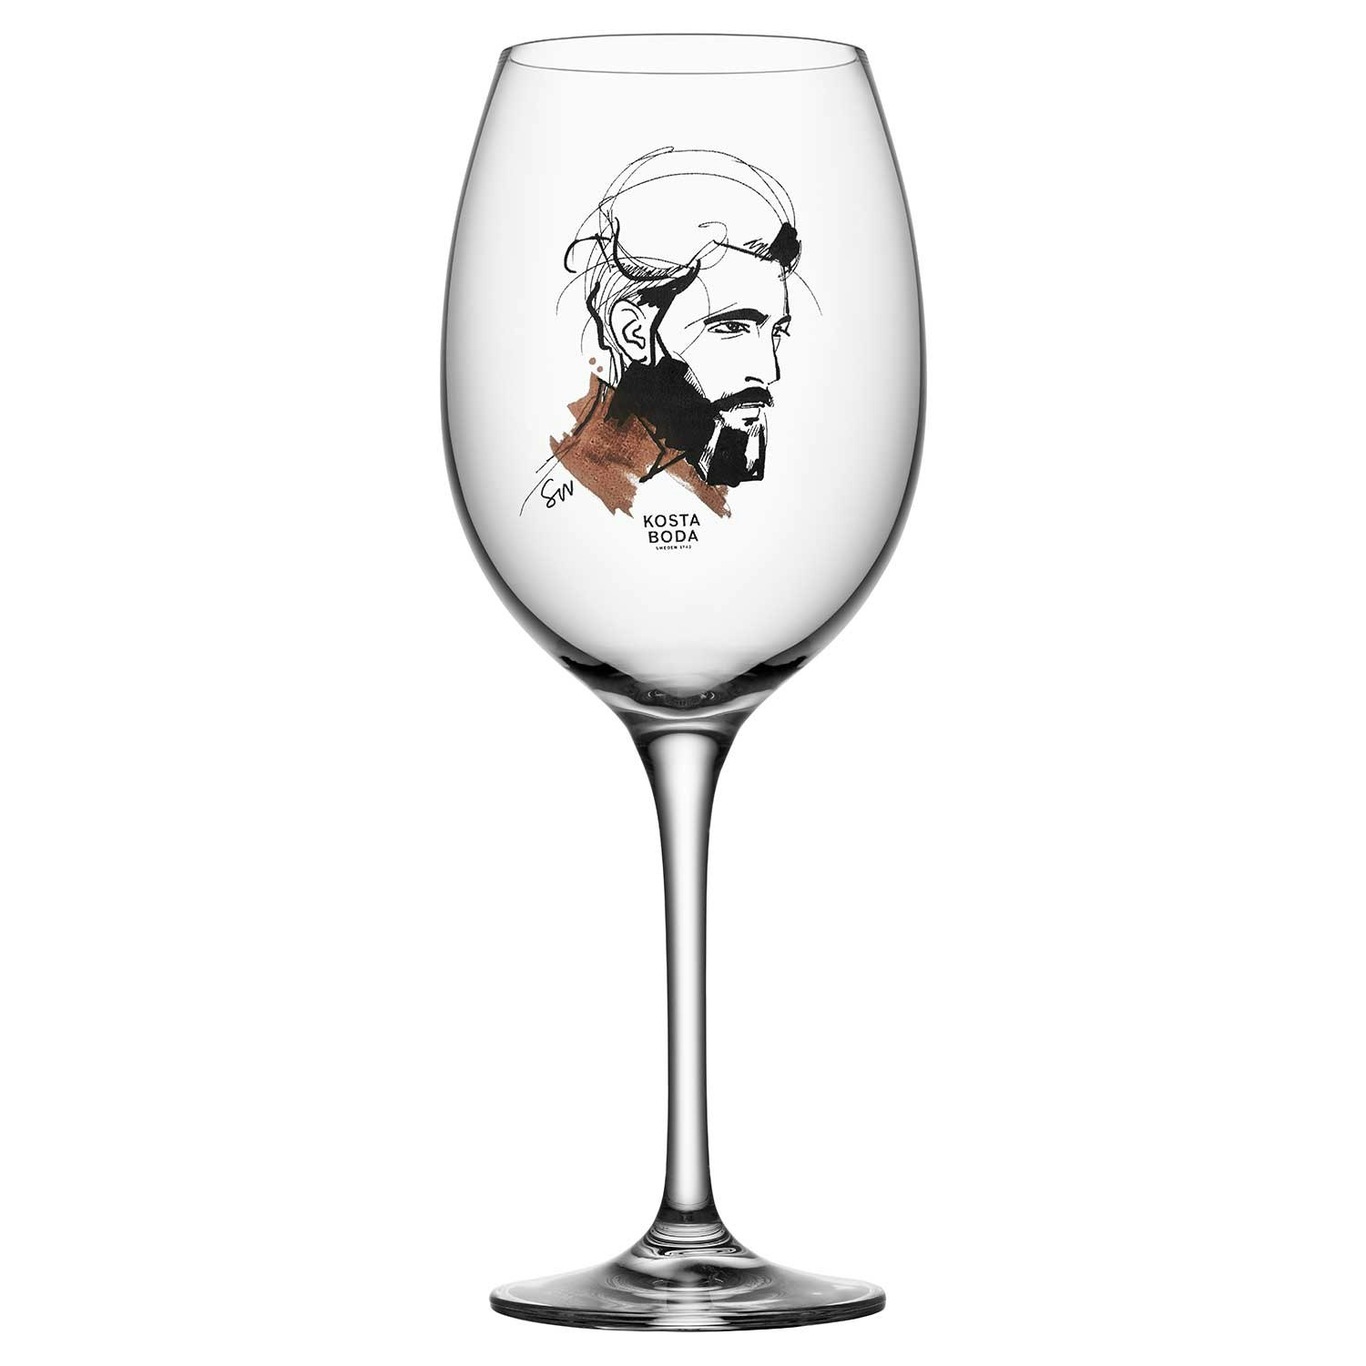 All About You Wine Glass 52 cl 2-pack, Wait For Him